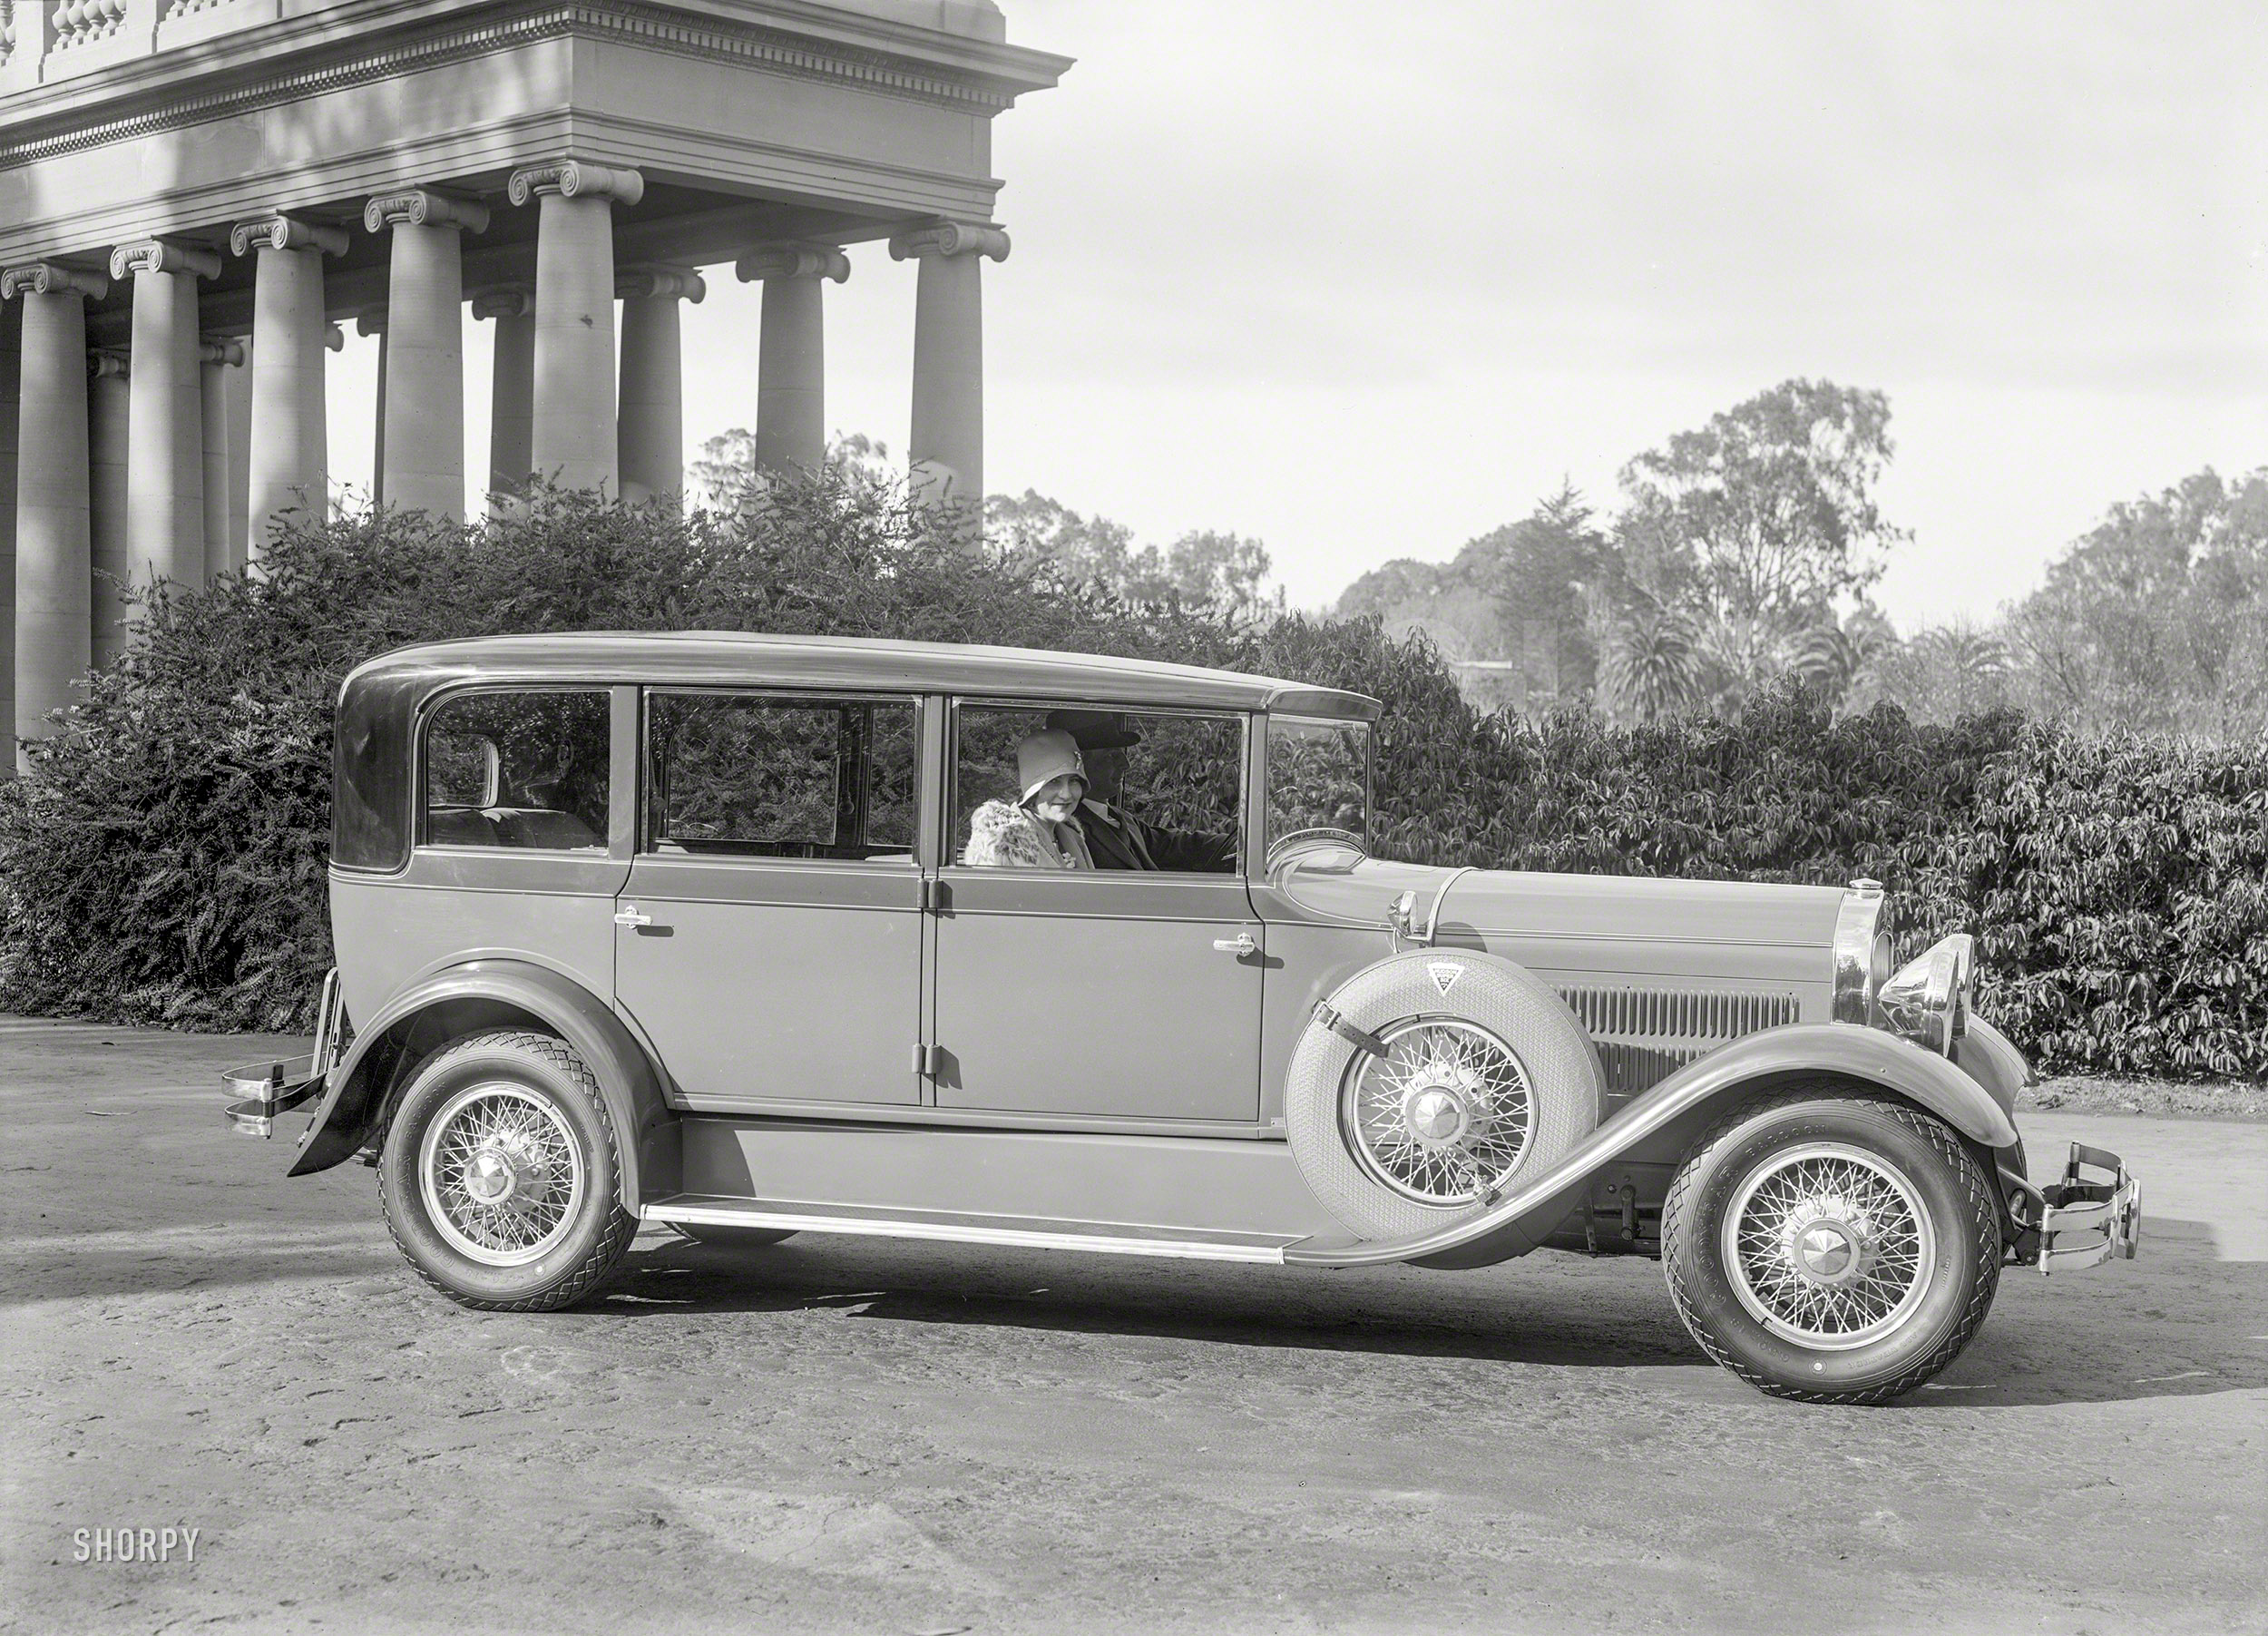 San Francisco, 1928. "Hudson Super Six with Biddle & Smart body at Golden Gate Park Music Stand." Also known as the Spreckels Temple of Music. 5x7 glass negative by Christopher Helin. View full size.